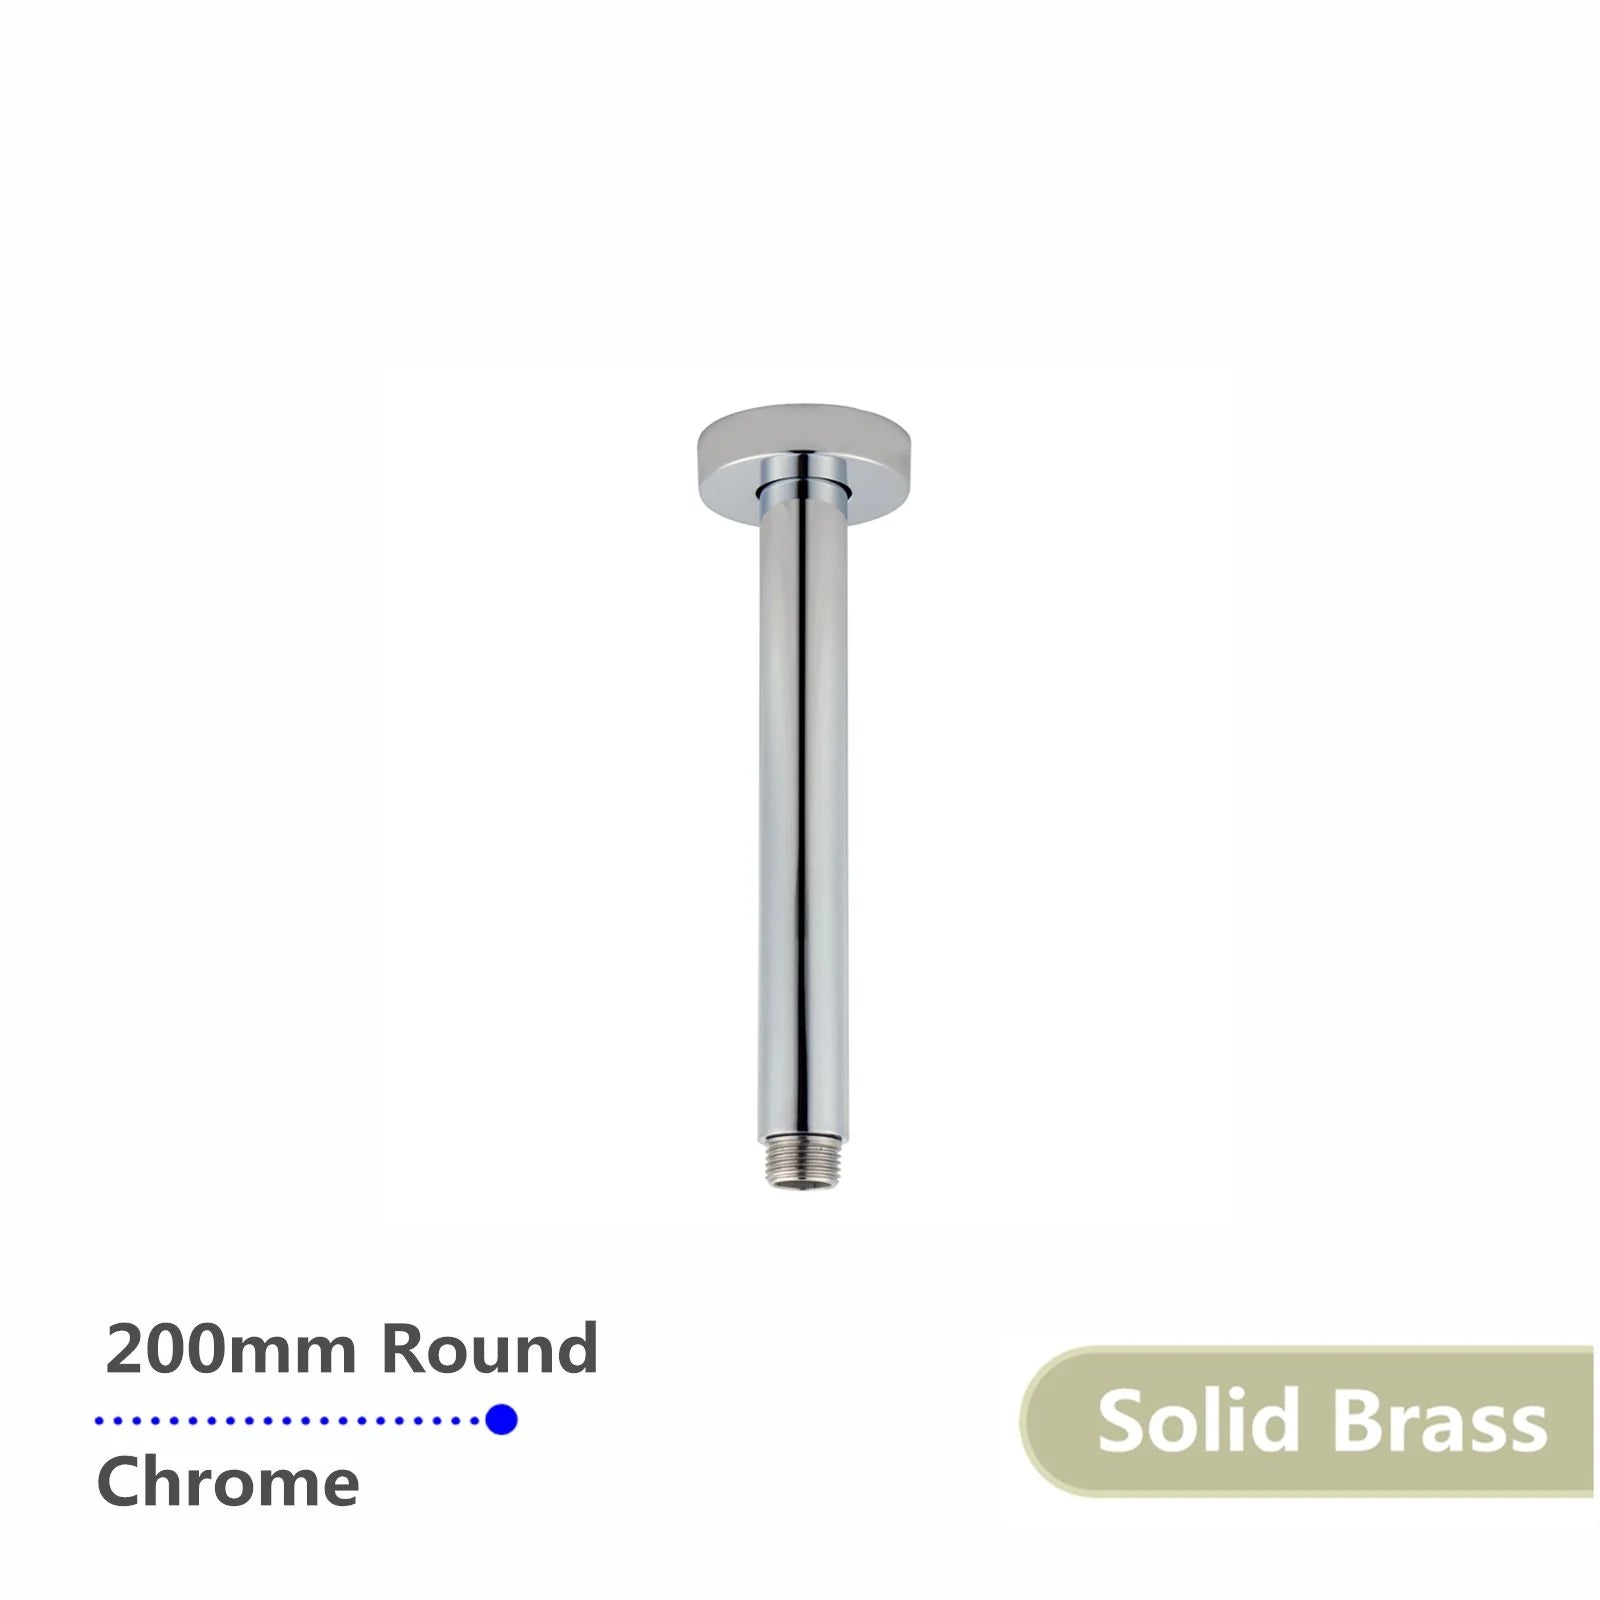 Round Ceiling Shower Arm: Metal Rrm for Shower head Mounts to Ceiling-200mm-Chrome-CH0105.SA